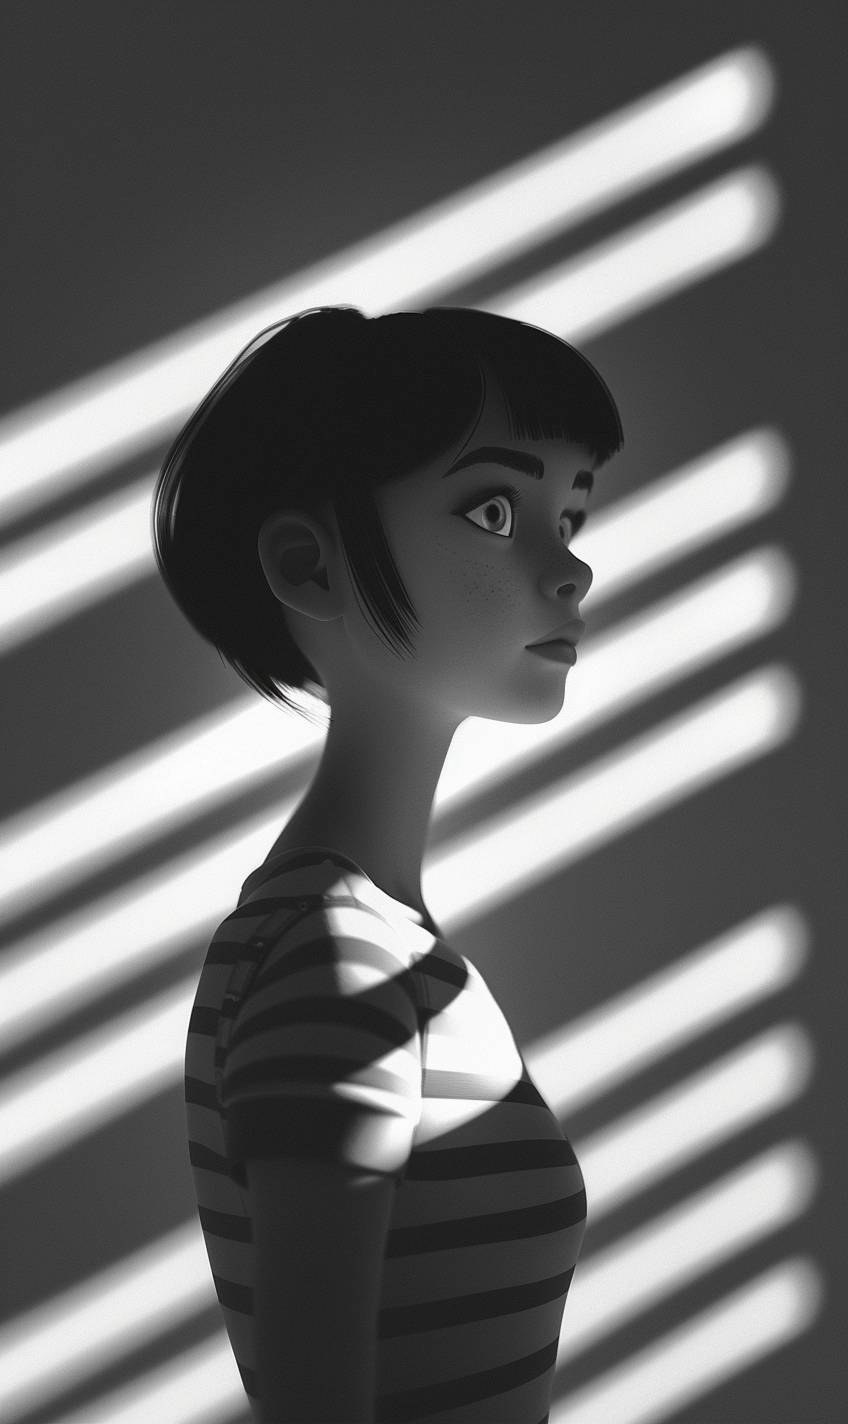 Adorable cartoon style, A young woman stands behind monochrome dim lights. She has short hair and is against a backdrop with monochrome light stripes. Her body is shown in full, and she is wearing a shirt with a simple pattern on the back, 3D render cartoon